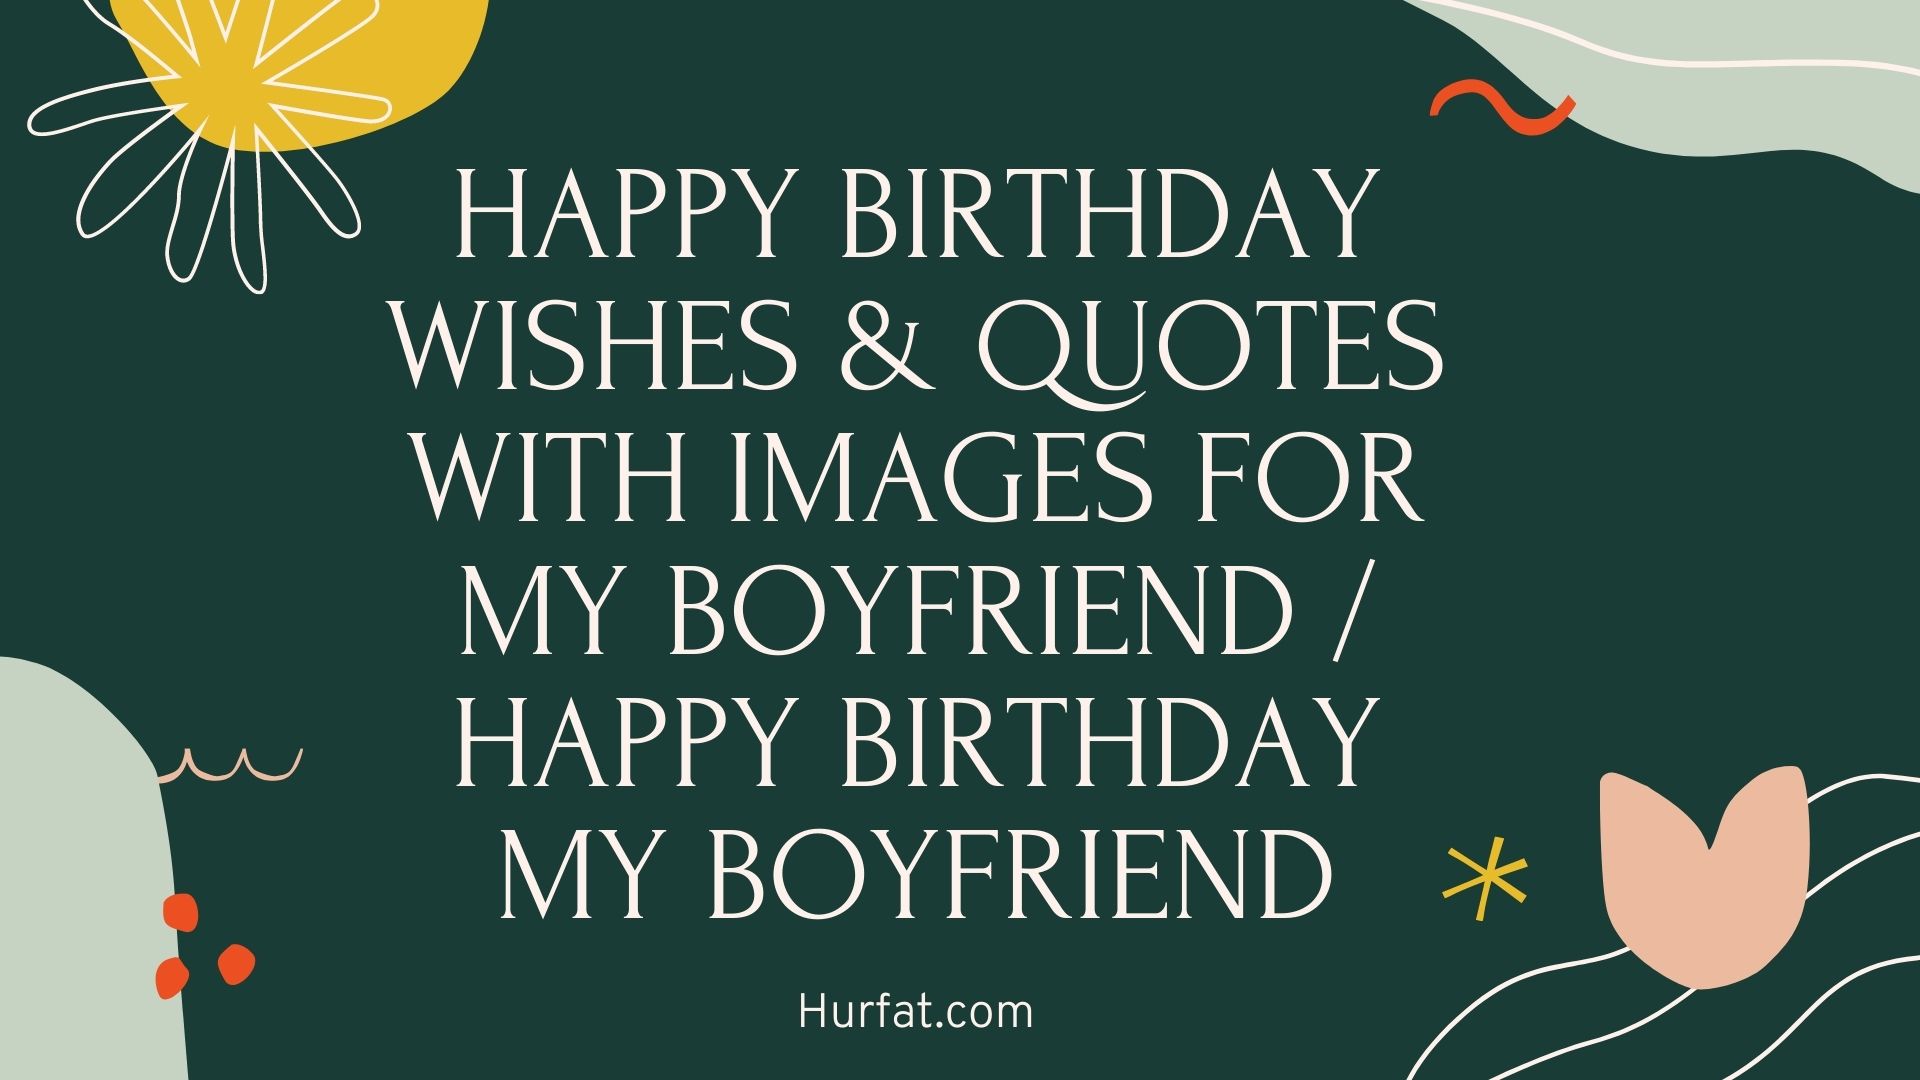 Happy Birthday Wishes & Quotes With Images For My